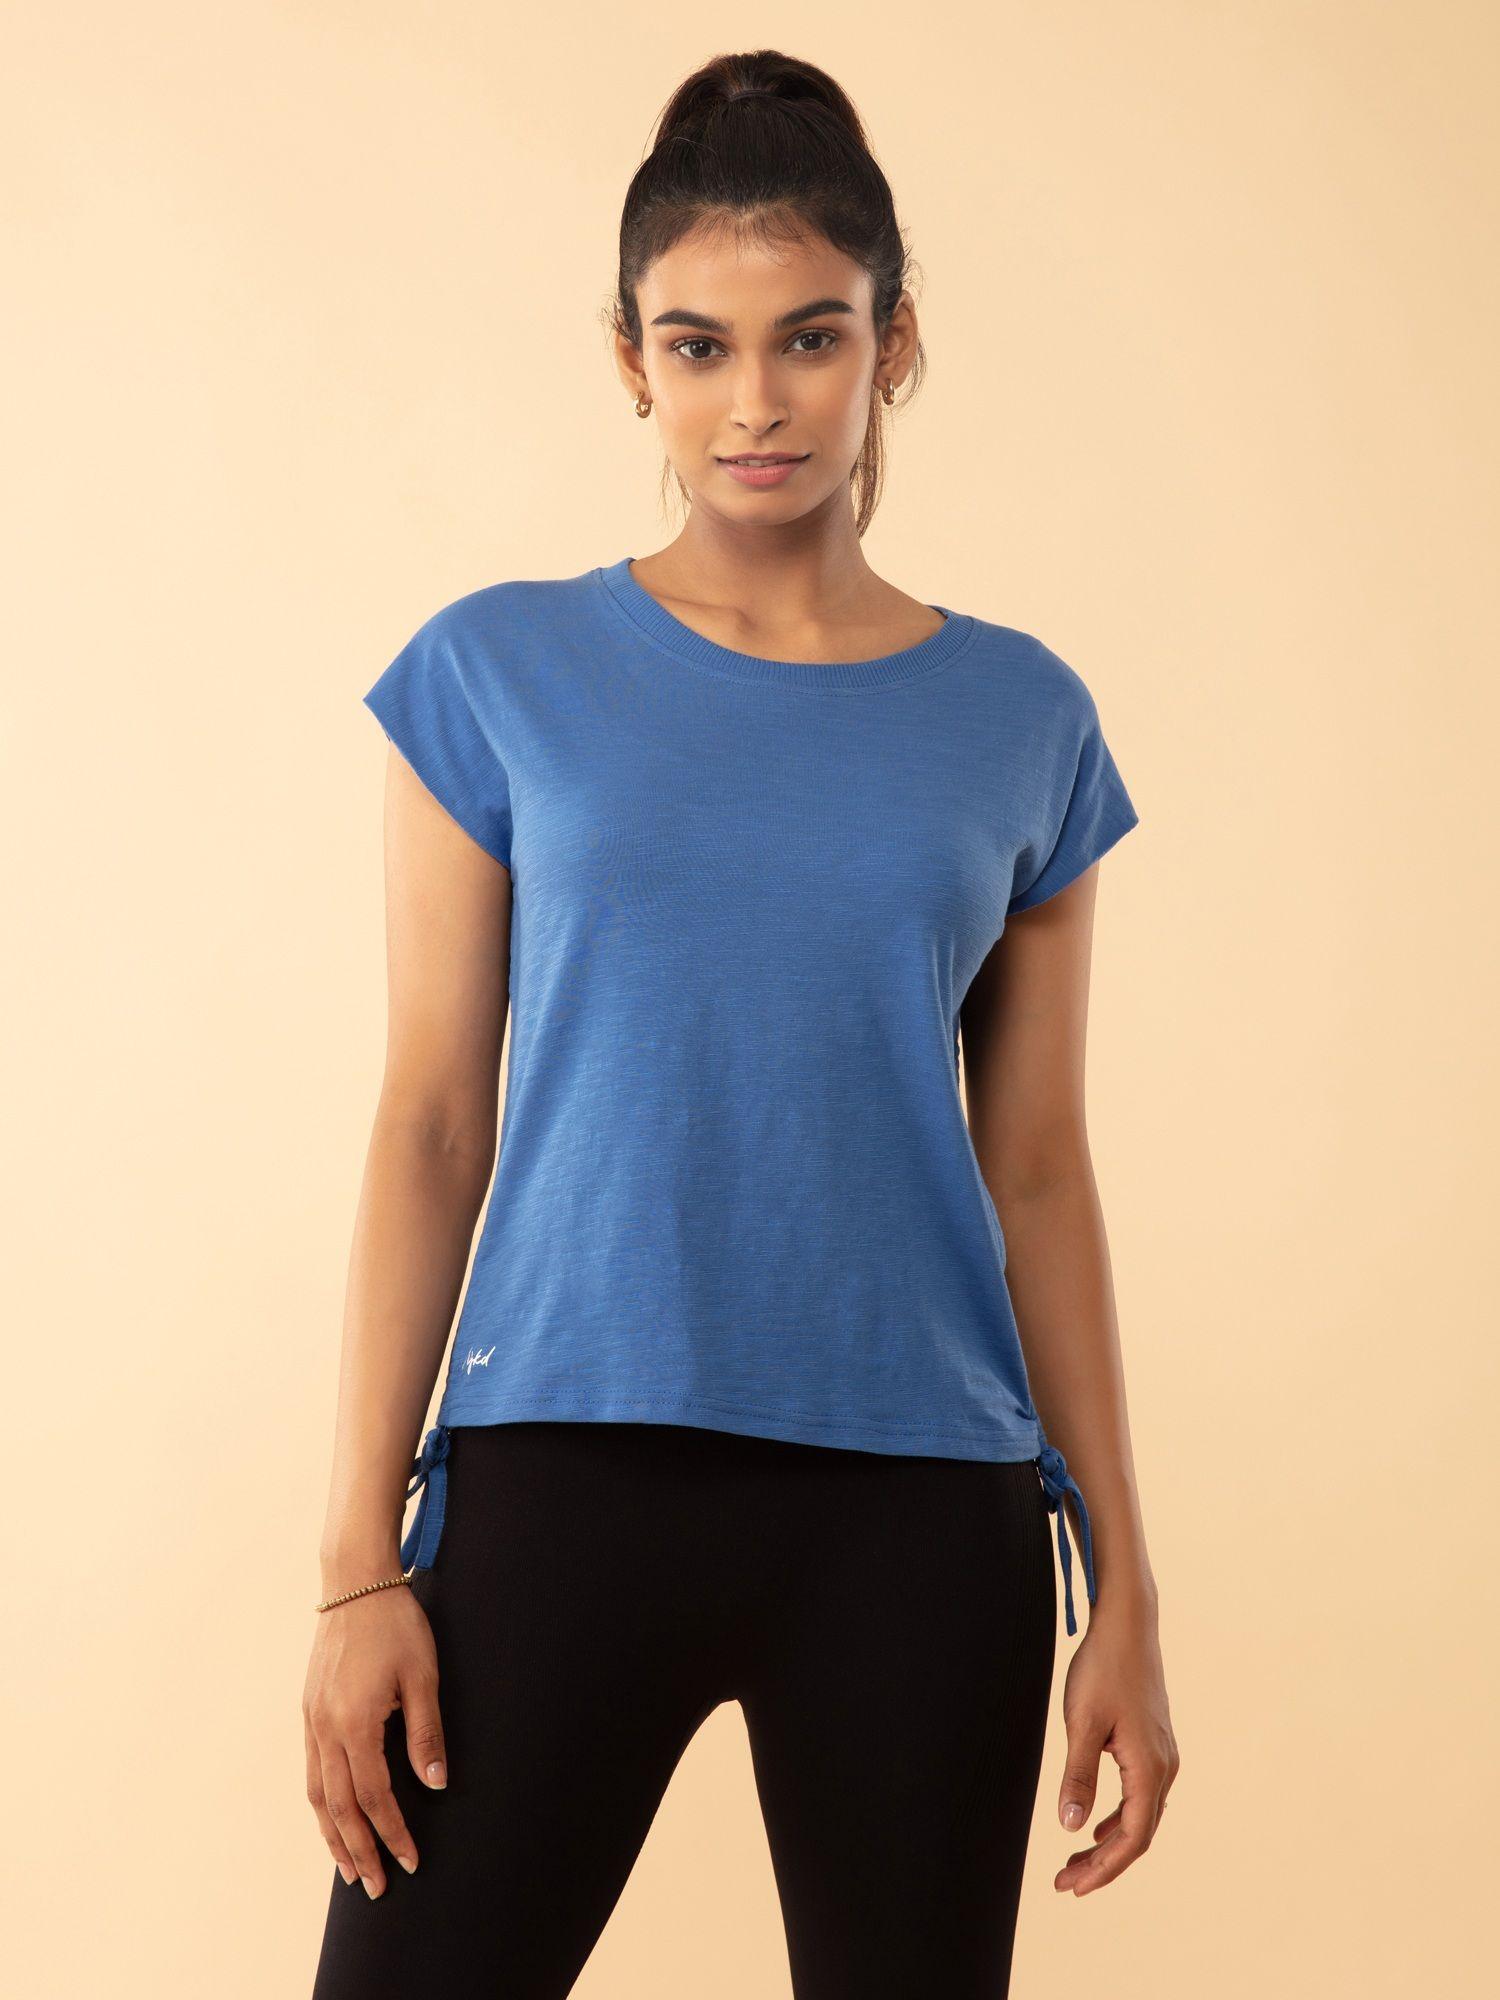 summer tee with pull up ruching at sides - nyat240 daylight blue